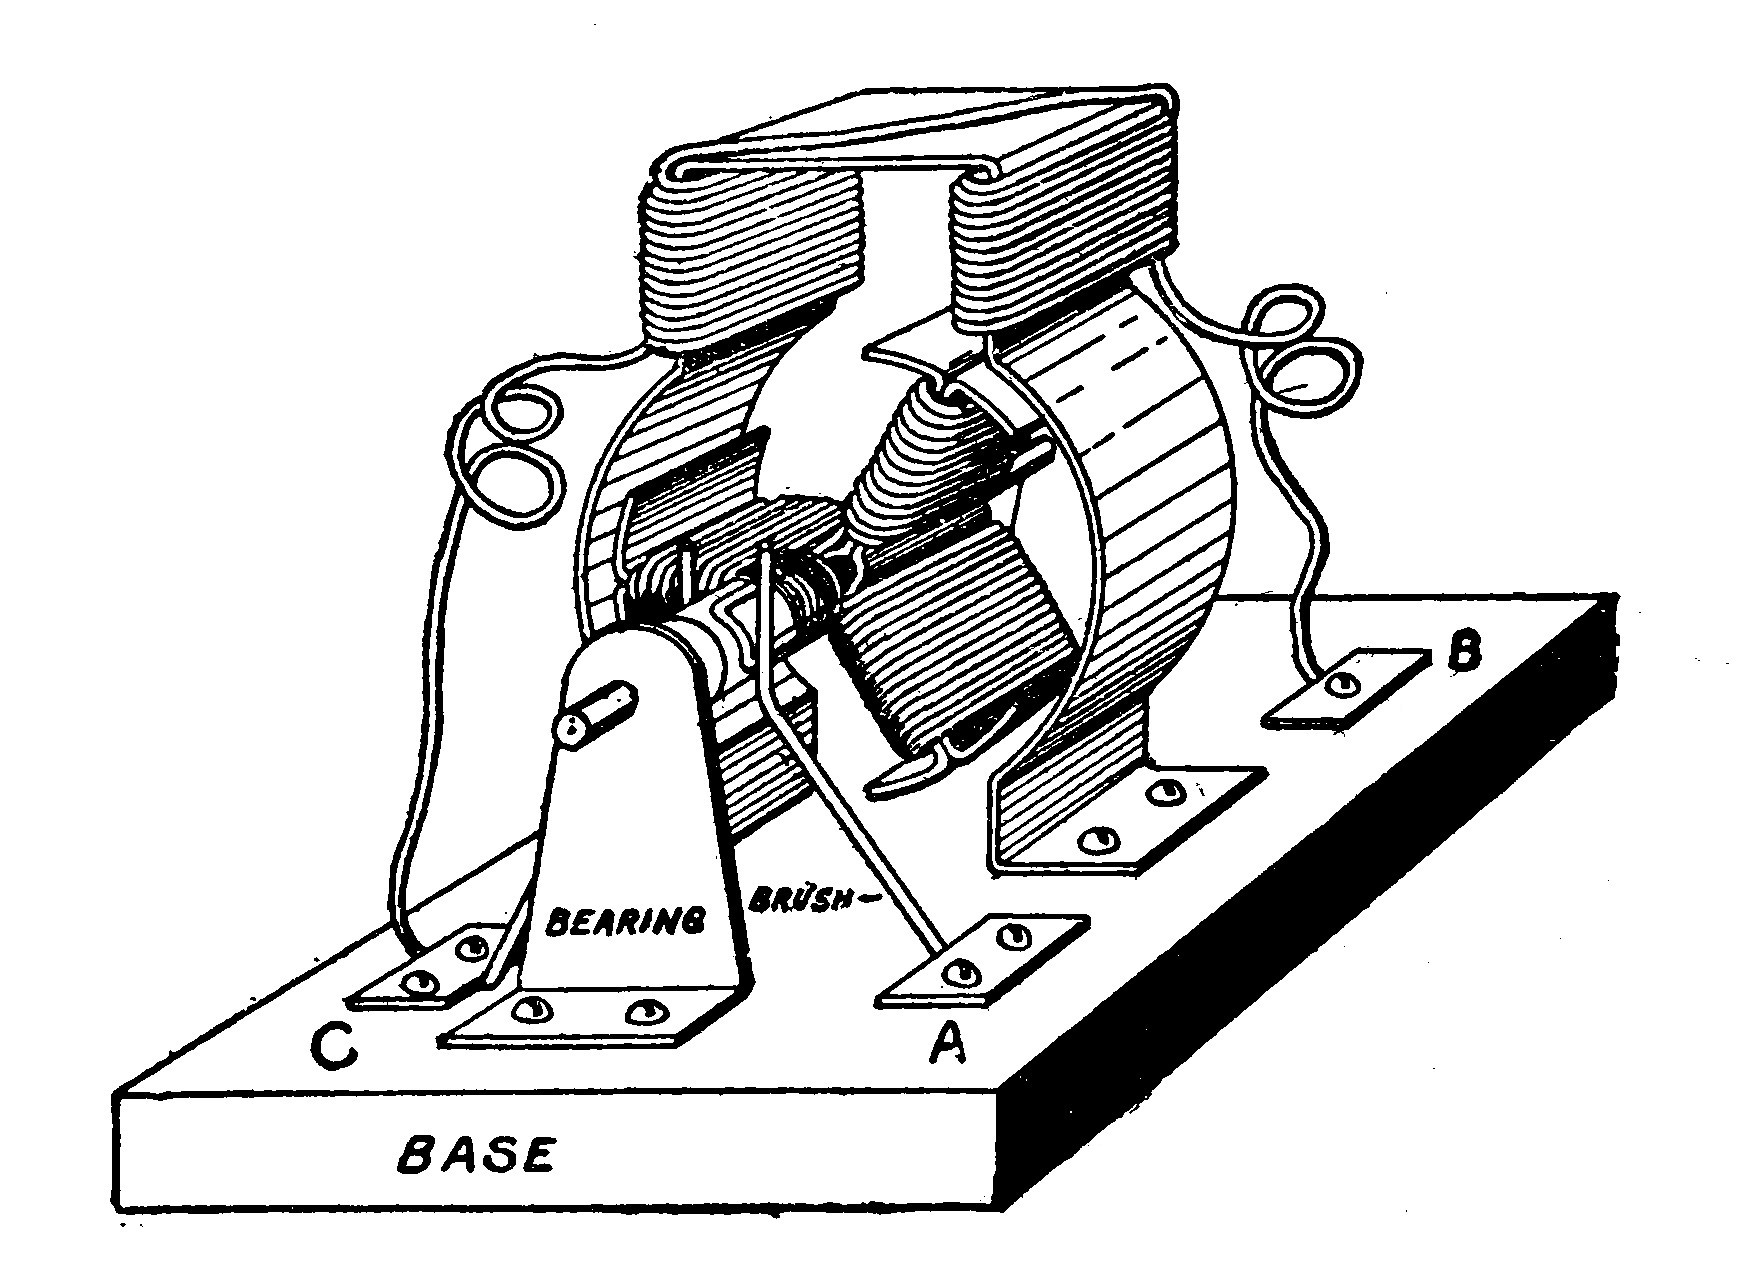 FIG. 24.—The completed Three-pole Motor.